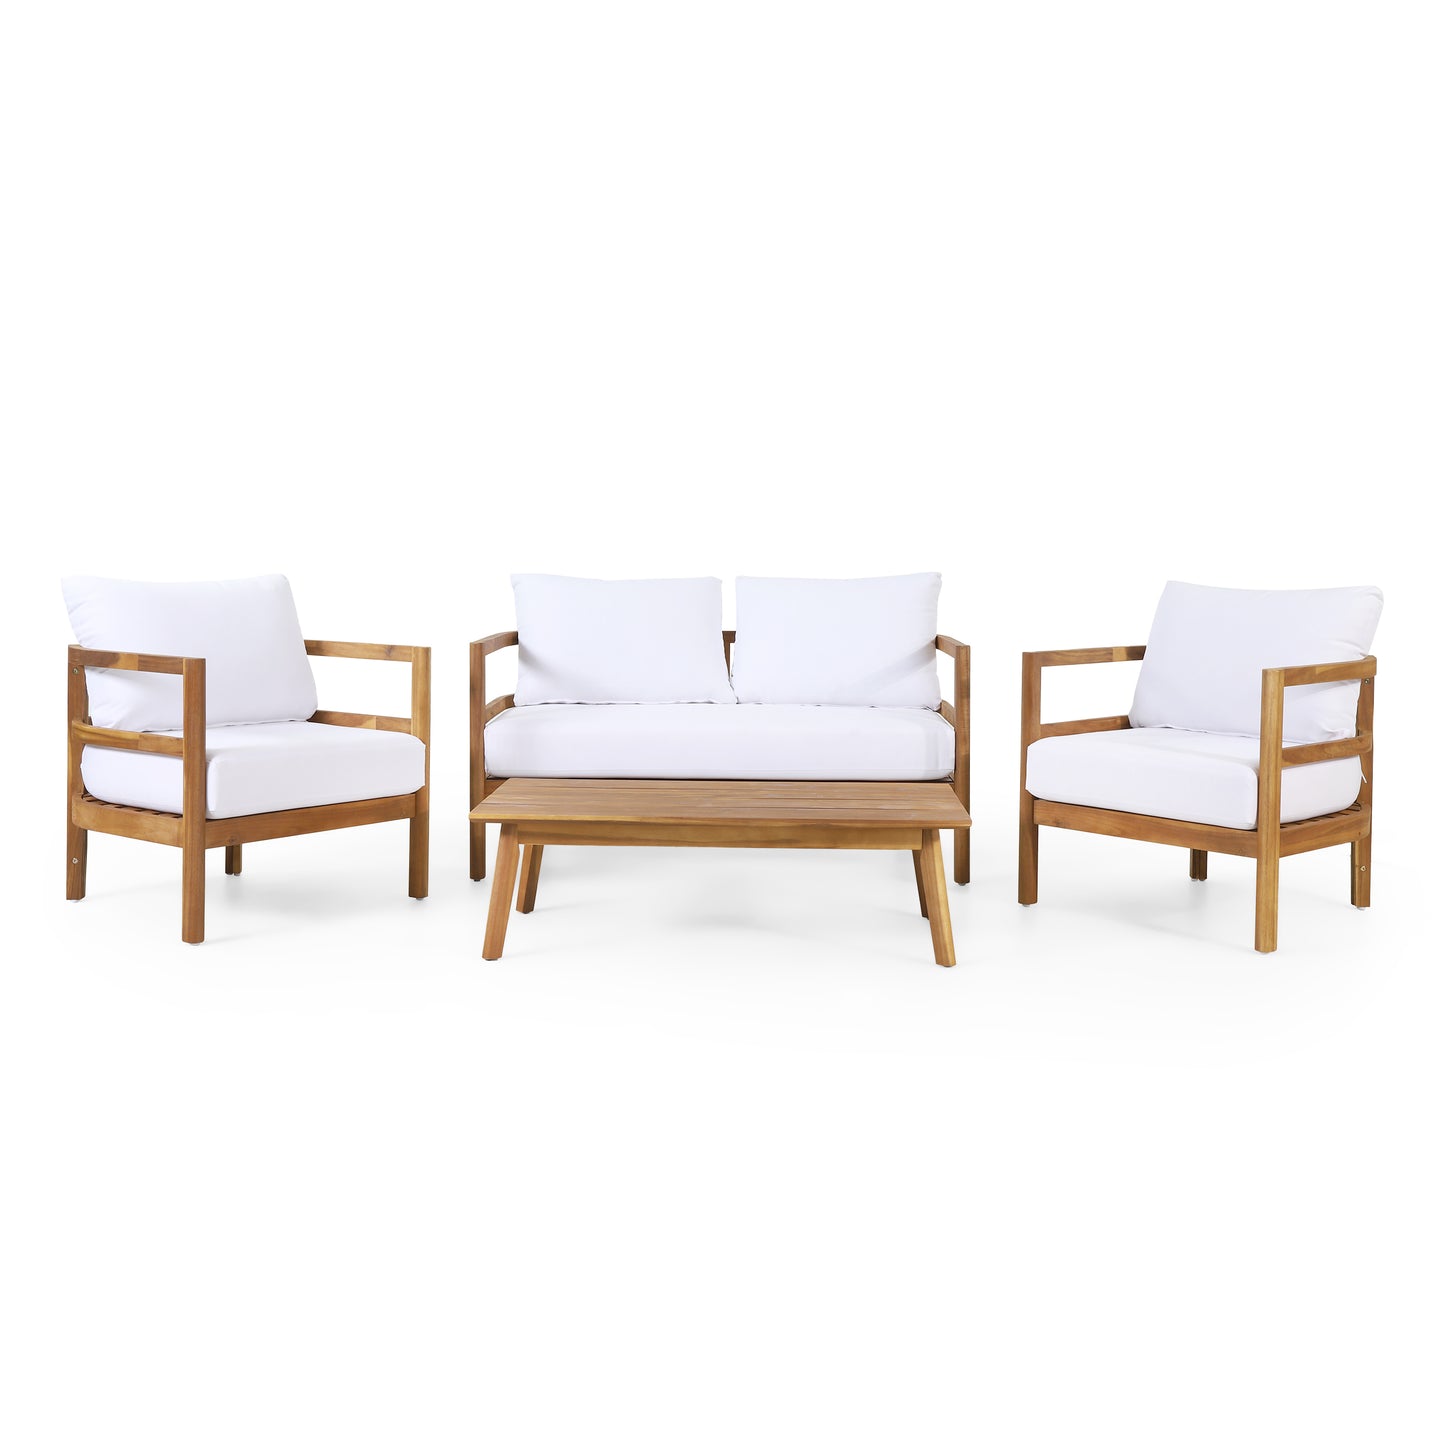 Aggie Outdoor Acacia Wood 4-Seater Chat Set with Cushion, Teak and White